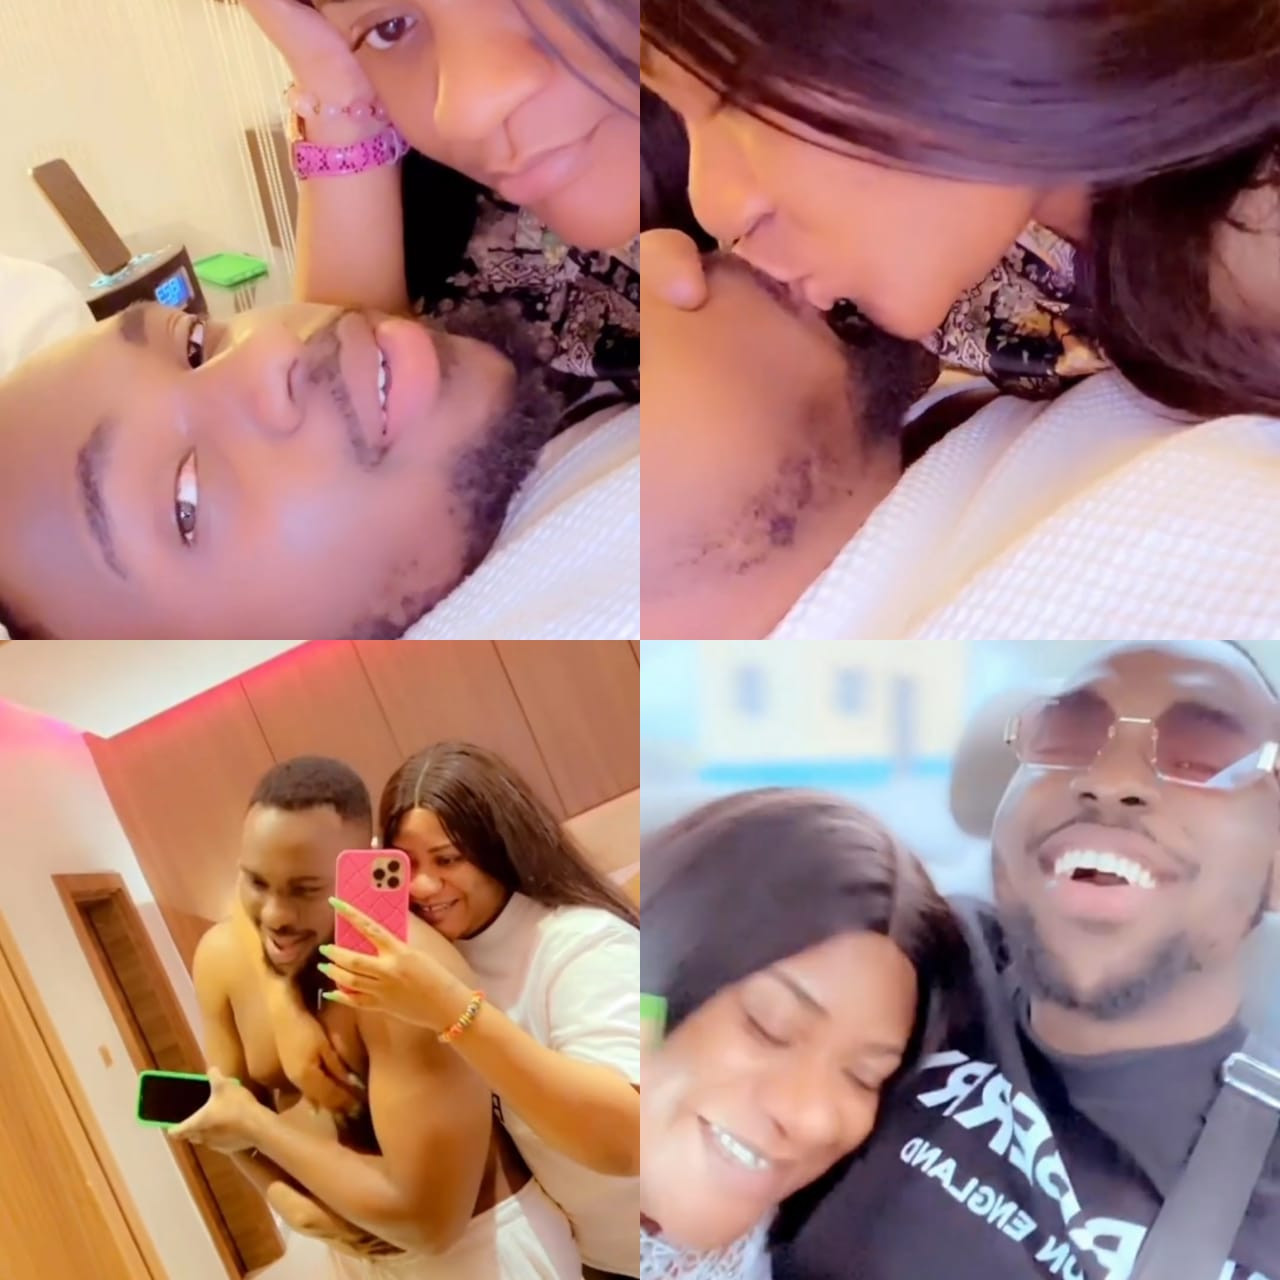 Actress Nkechi Blessing Sunday flaunts her new man on IG (video)